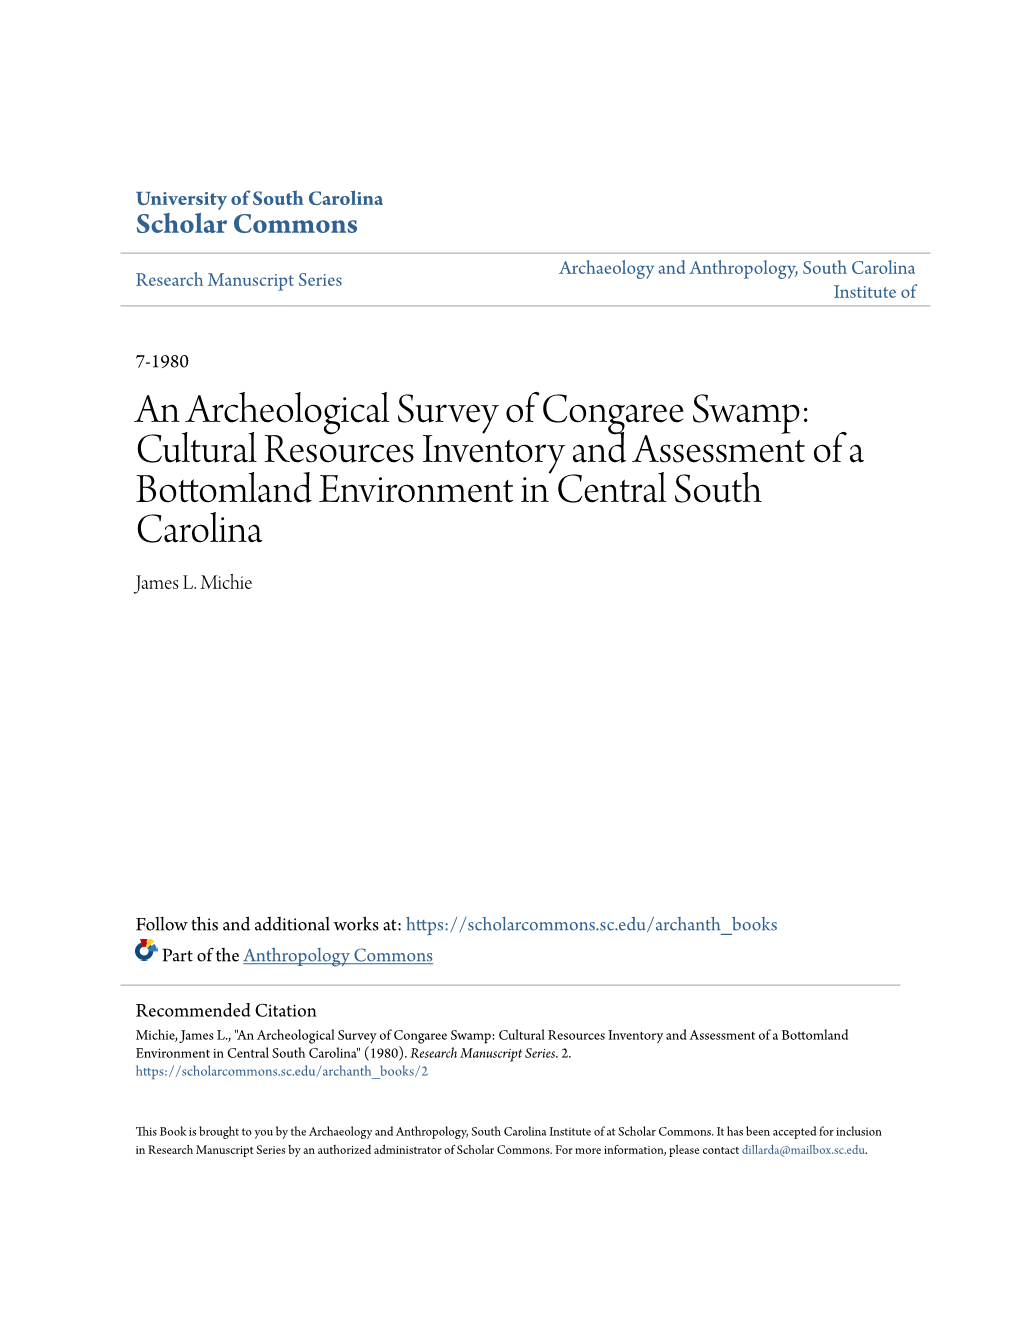 An Archeological Survey of Congaree Swamp: Cultural Resources Inventory and Assessment of a Bottomland Environment in Central South Carolina James L